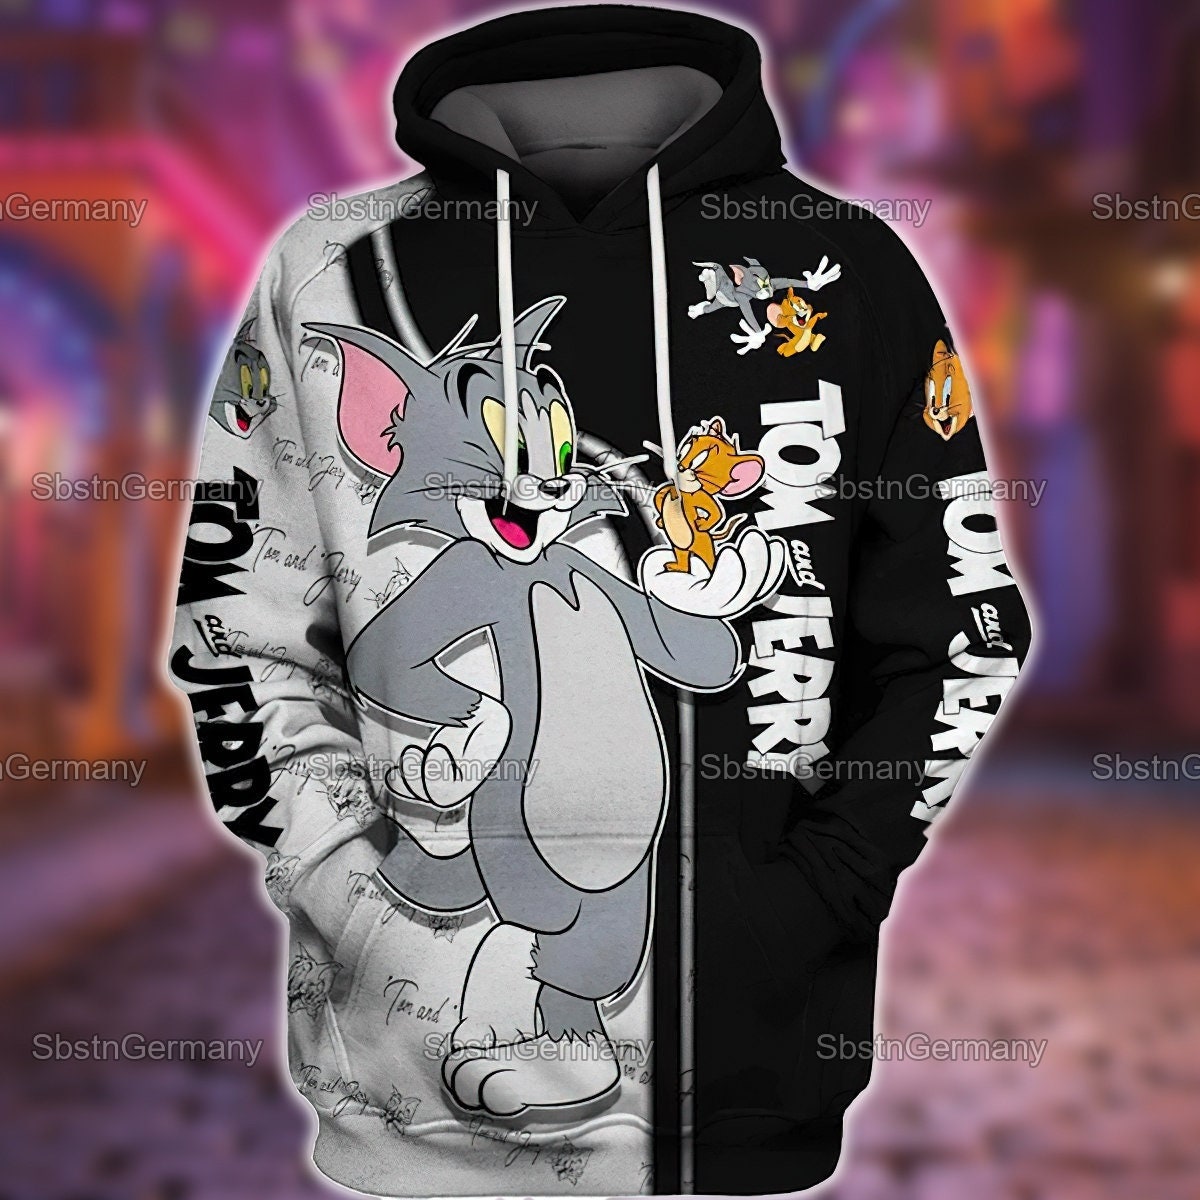 Tom and jerry Children Costume Spring Boy Hoodie Kids Clothes